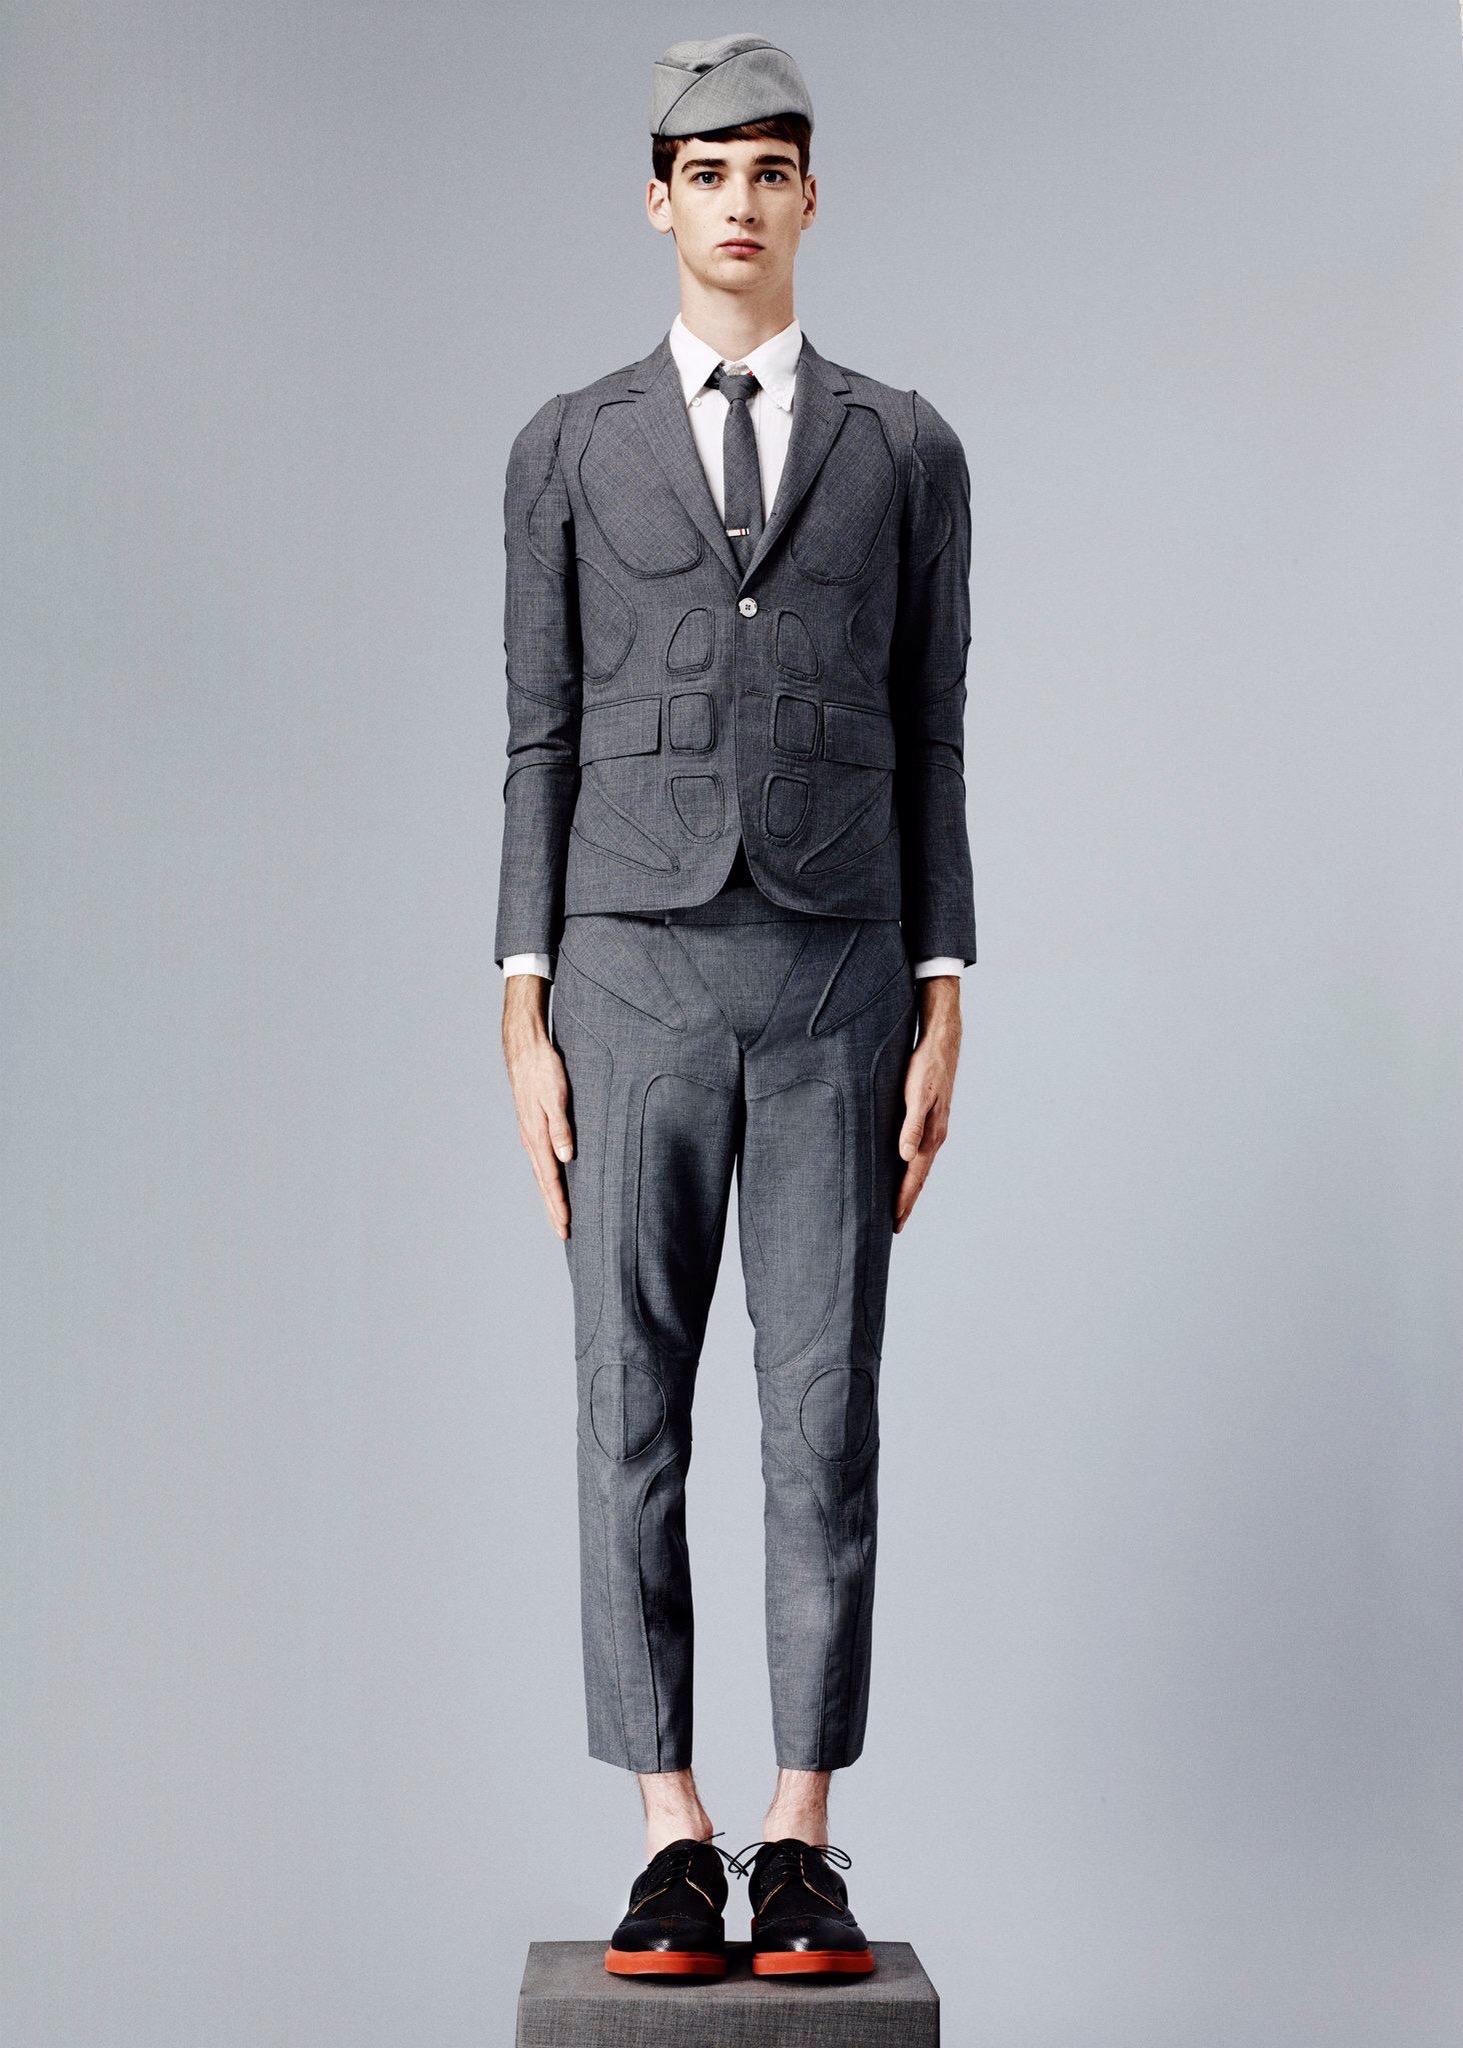 THOM BROWNE : 2015 S/S COLLECTION - Chasseur Magazine